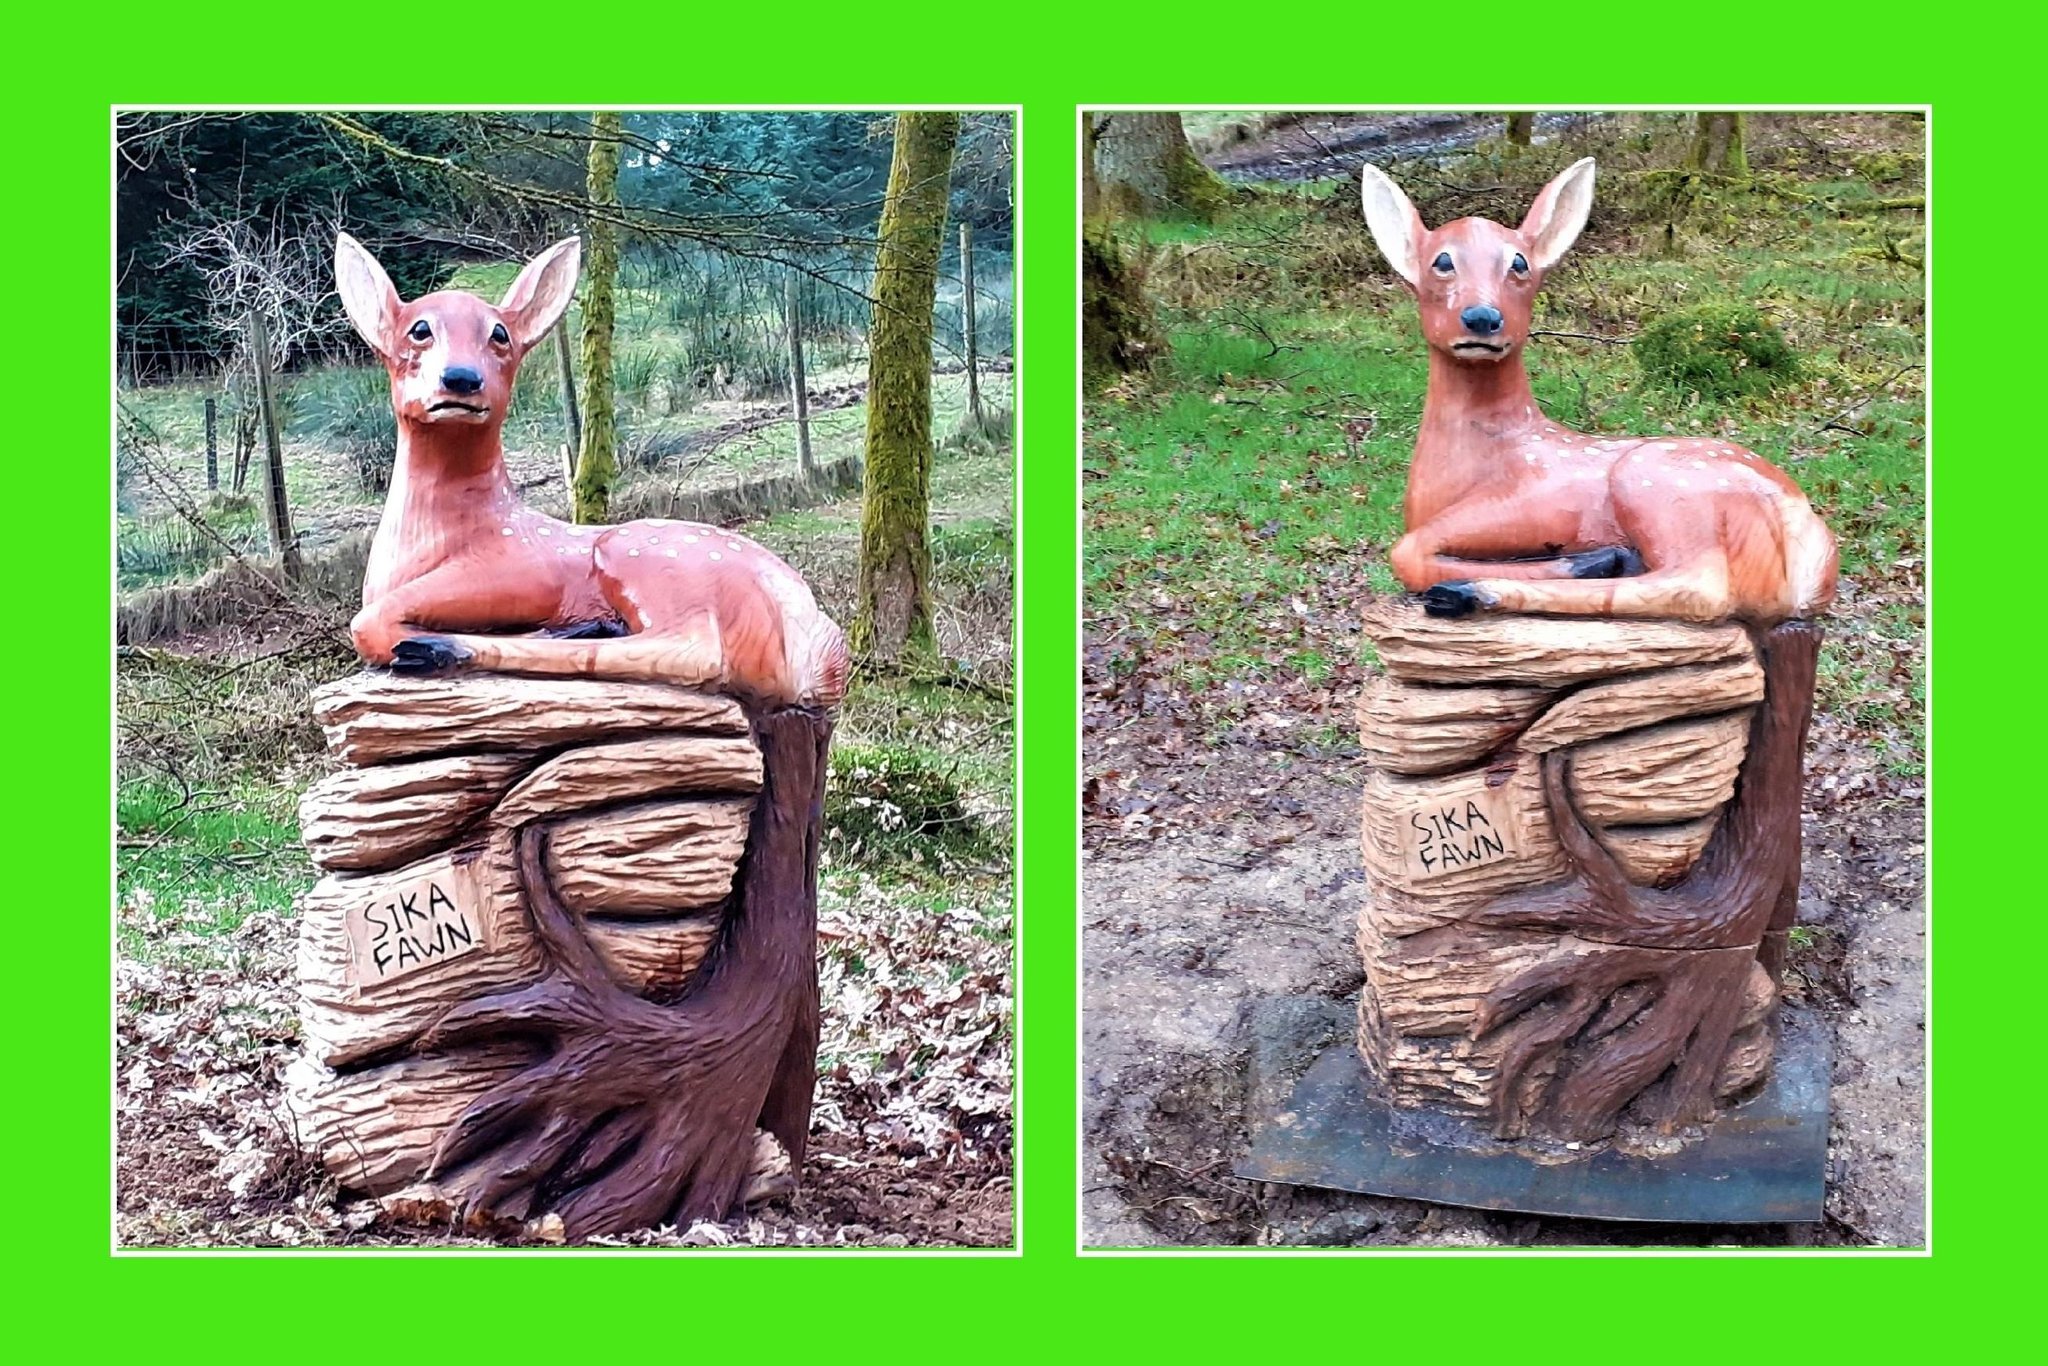 Bid made to steal £2.5k deer statue from forest park with a chainsaw – shortly before 300 cars descend on site